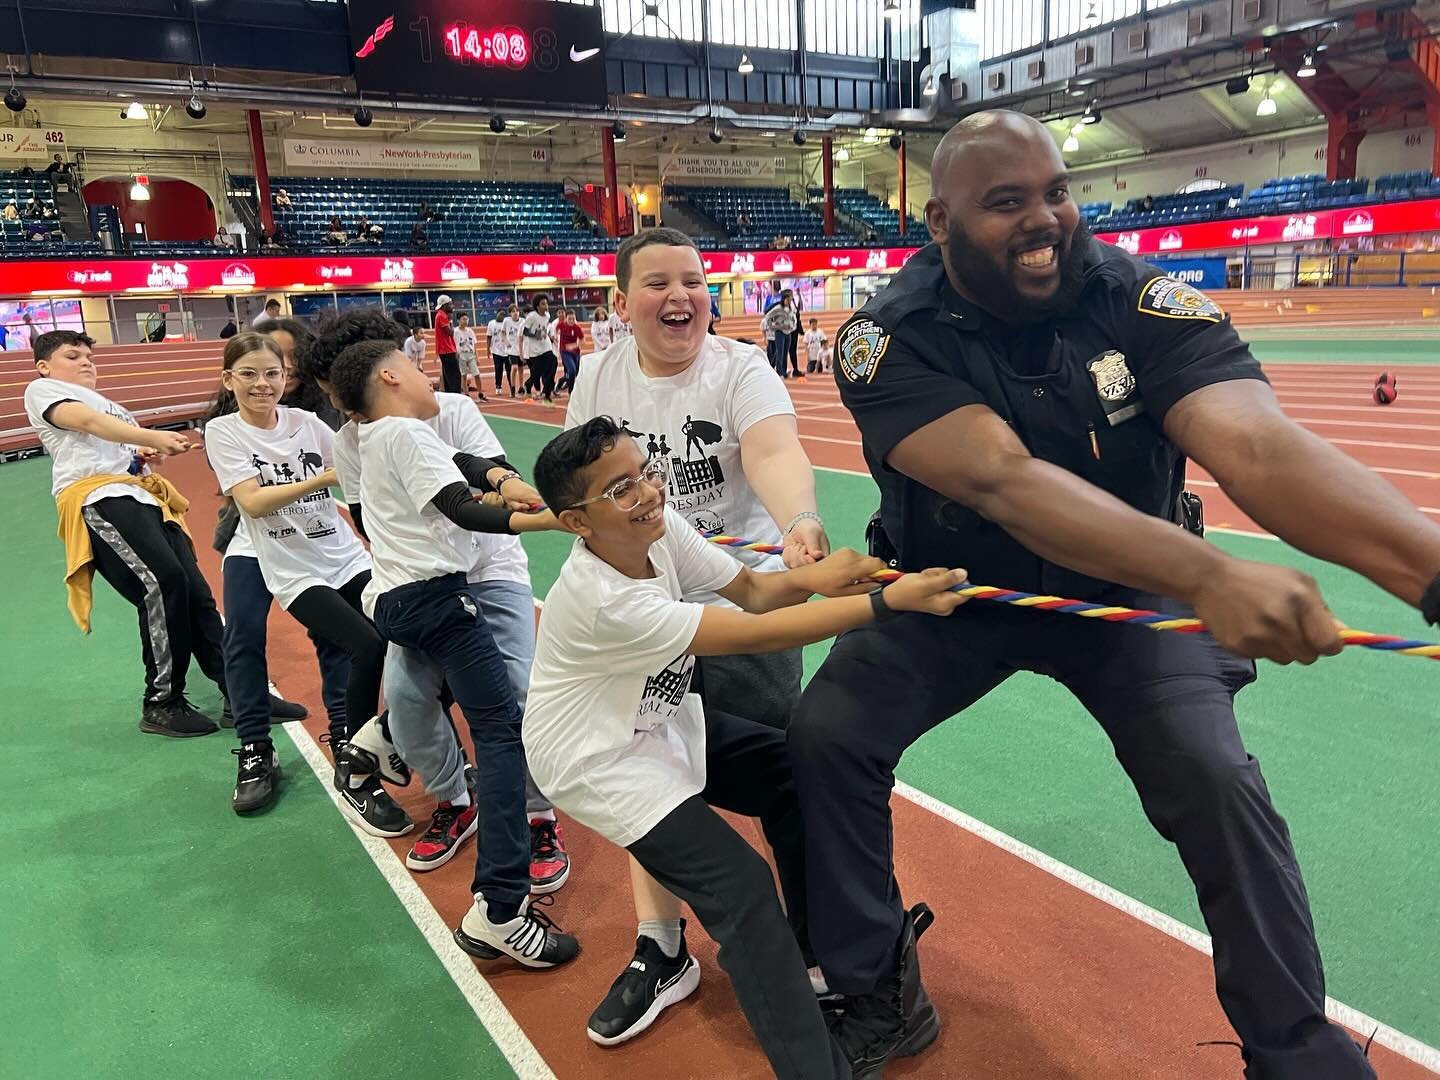 Who are the REAL heroes?  Our amazing firefighters, police officers, and EMTs of course!

The Armory celebrated Real Heroes Day with over 150 kids who got to meet these incredible heroes, explore their vehicles , and even race the officers!

It was a